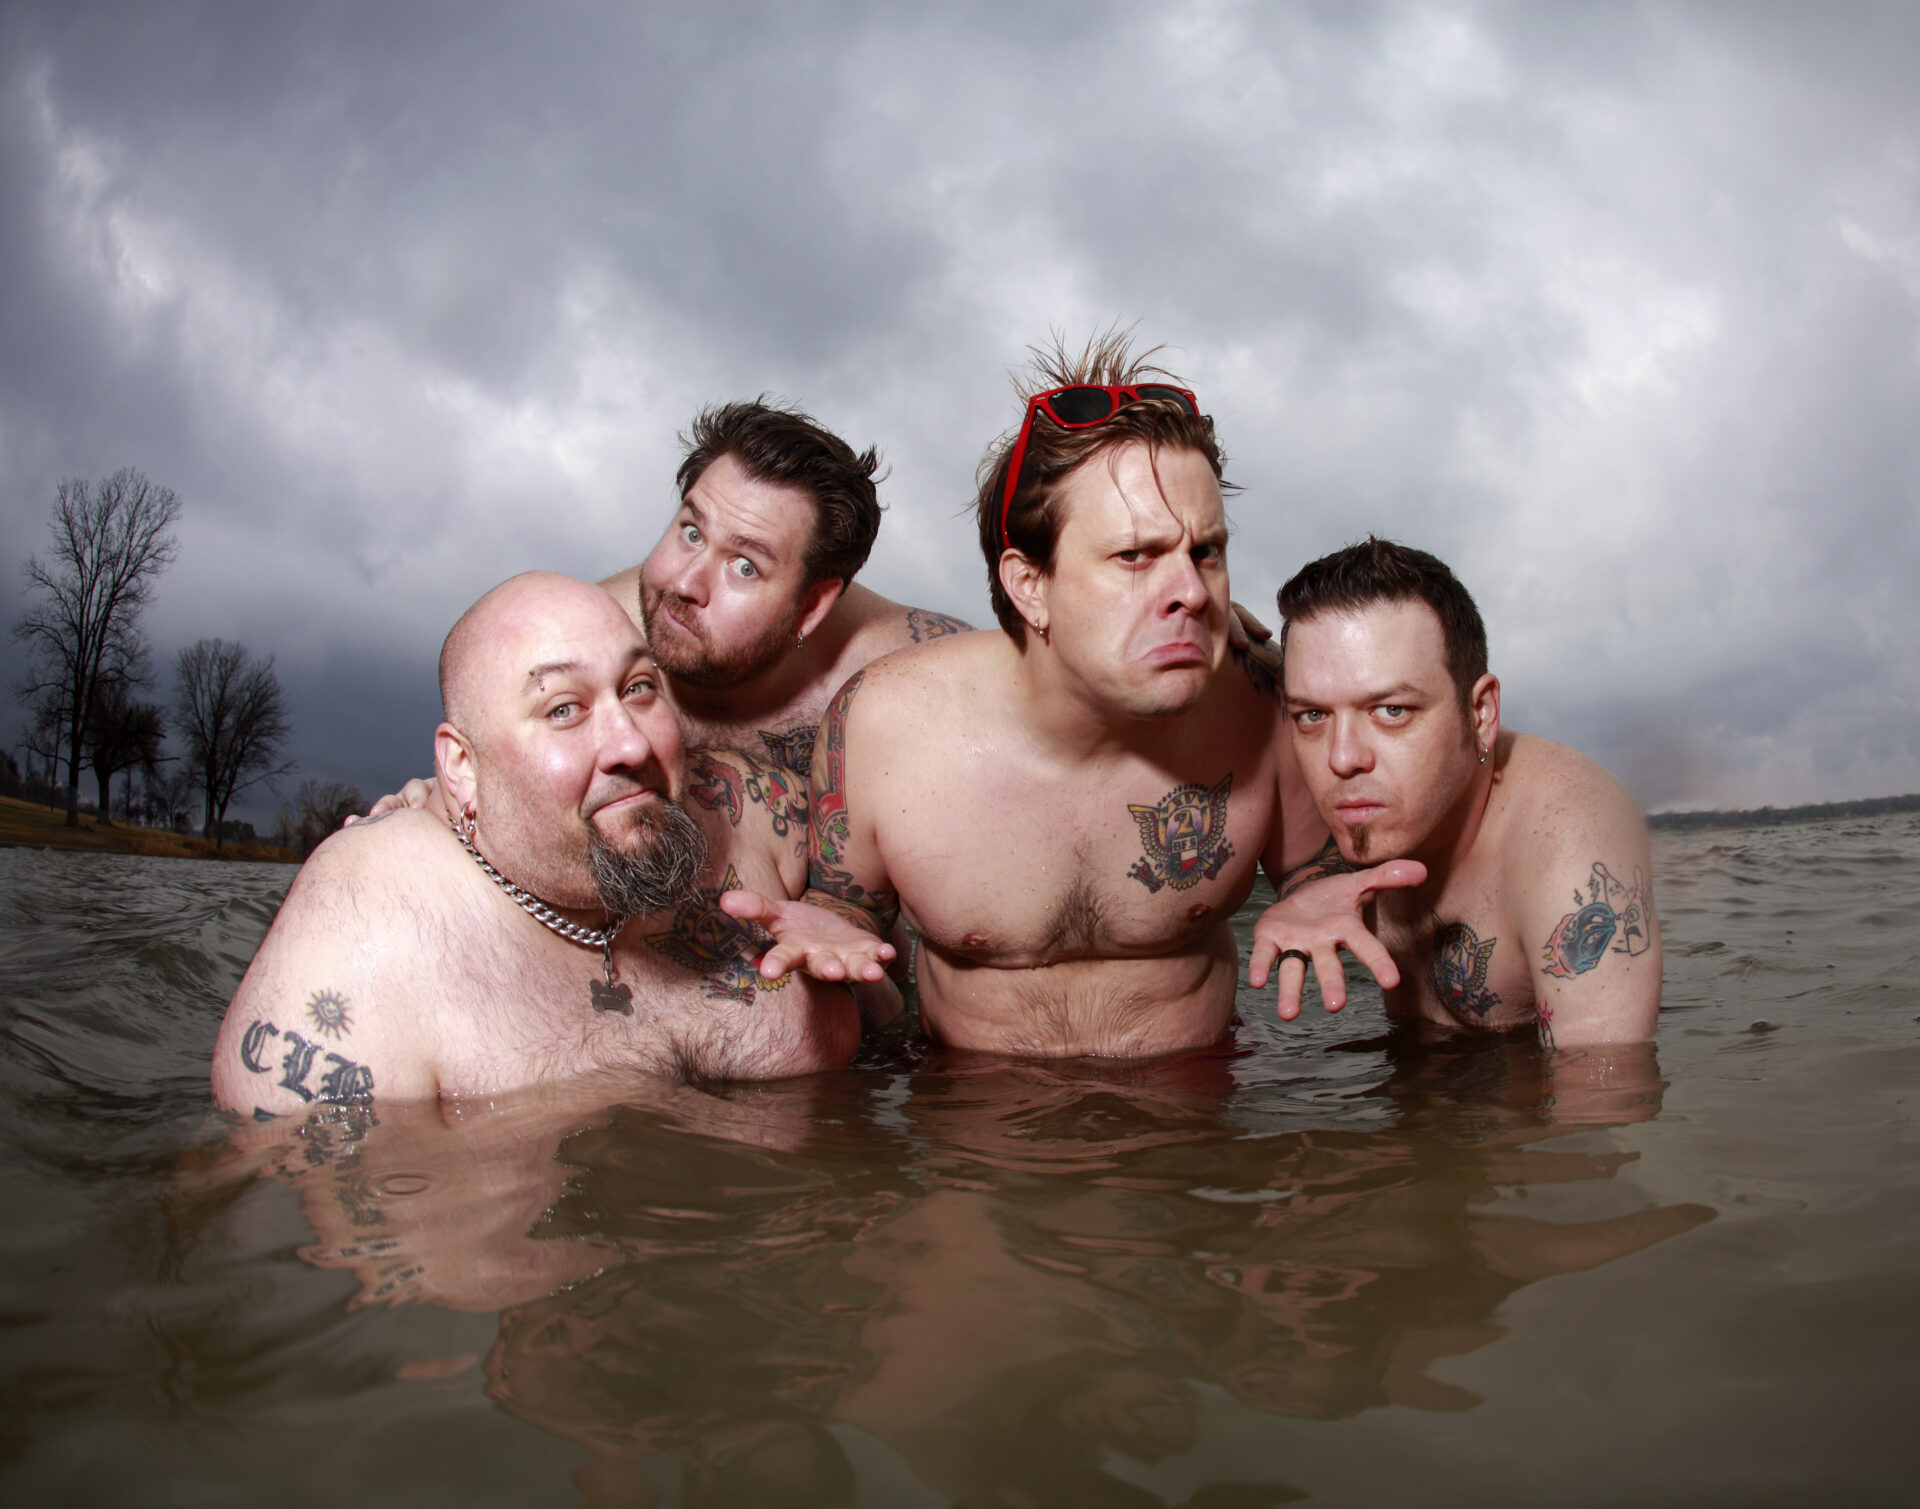 INTERVIEW: Jaret Reddick of Bowling for Soup discusses longevity, the Grammy’s, and the future